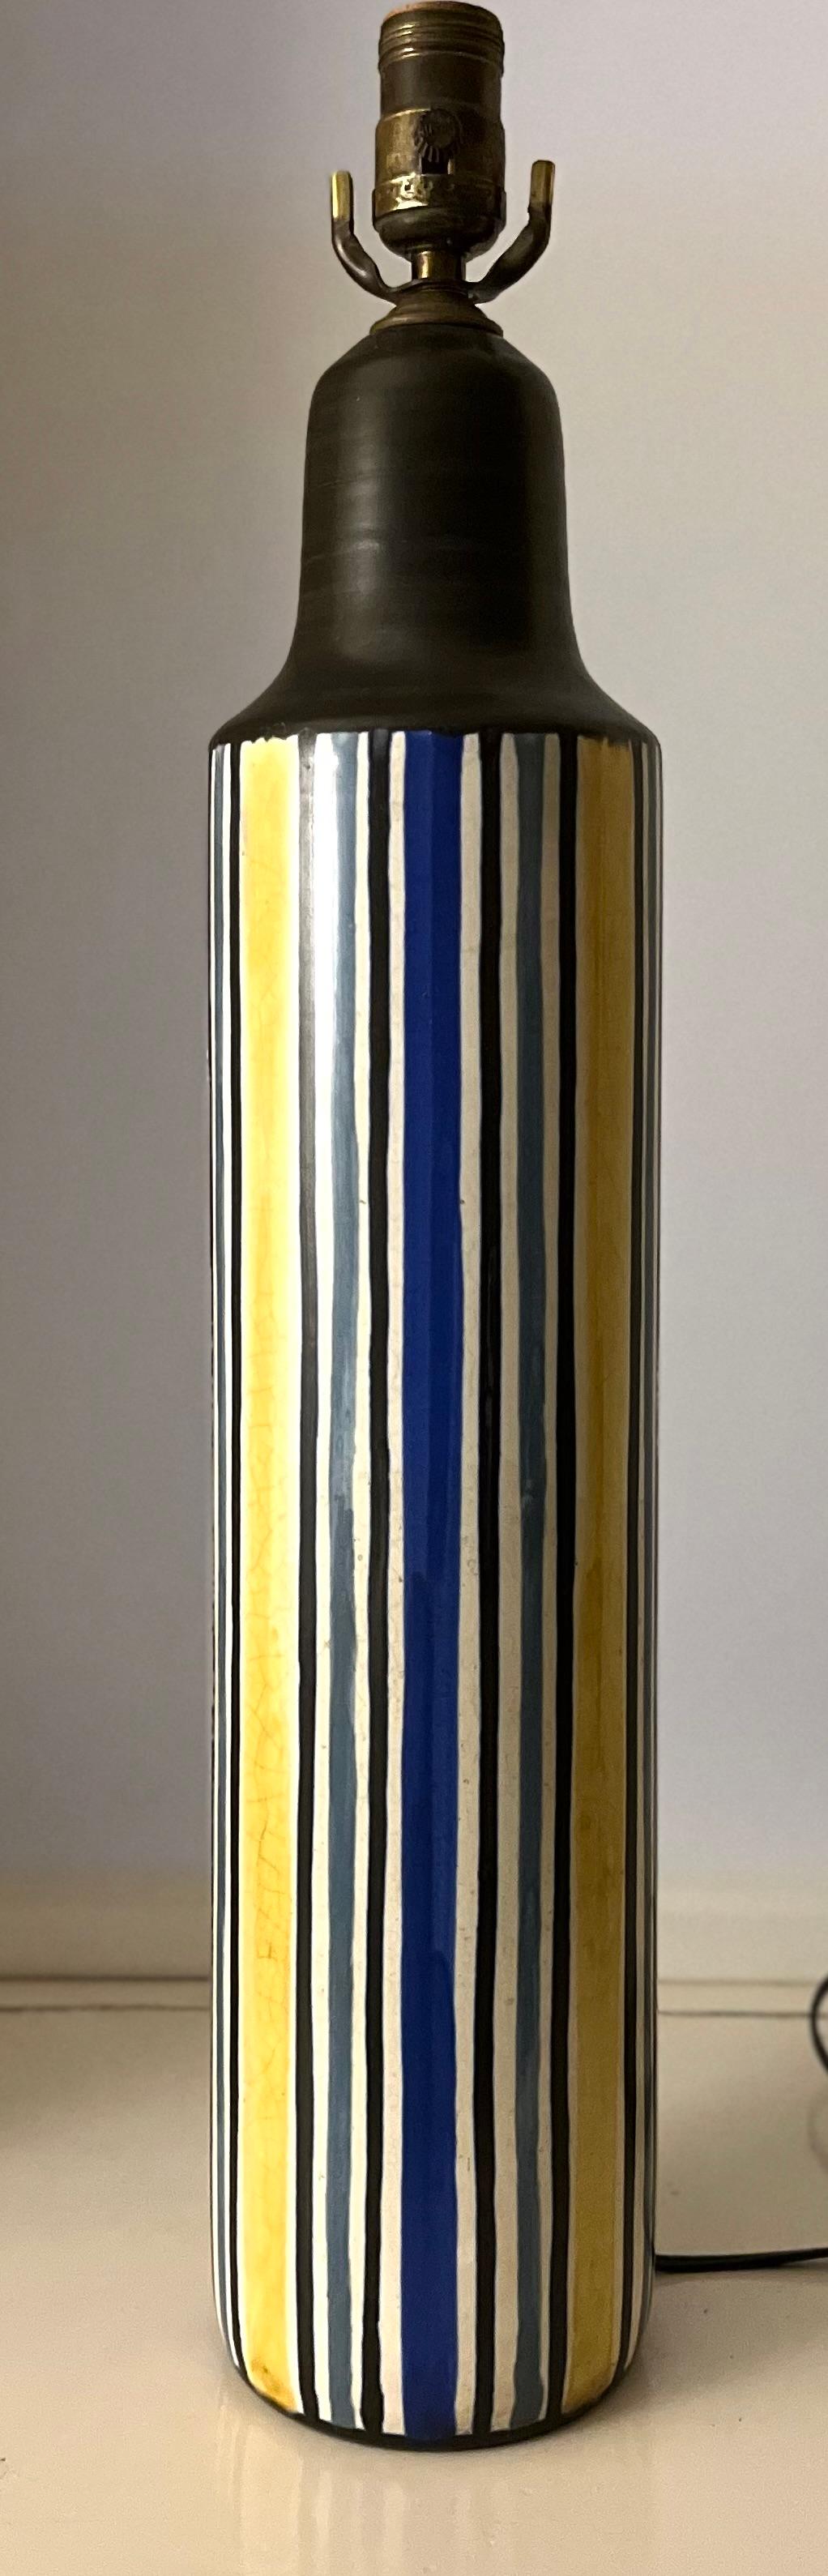 A rare mid-20th century table lamp in ceramic by Lotte and Gunnar Bostlund, recently rewired, model #302. White background with yellow, blue and grey stripes. Signed “Lotte” in the glaze. 

The History of Lotte Lamps and the Bostlund Family
The